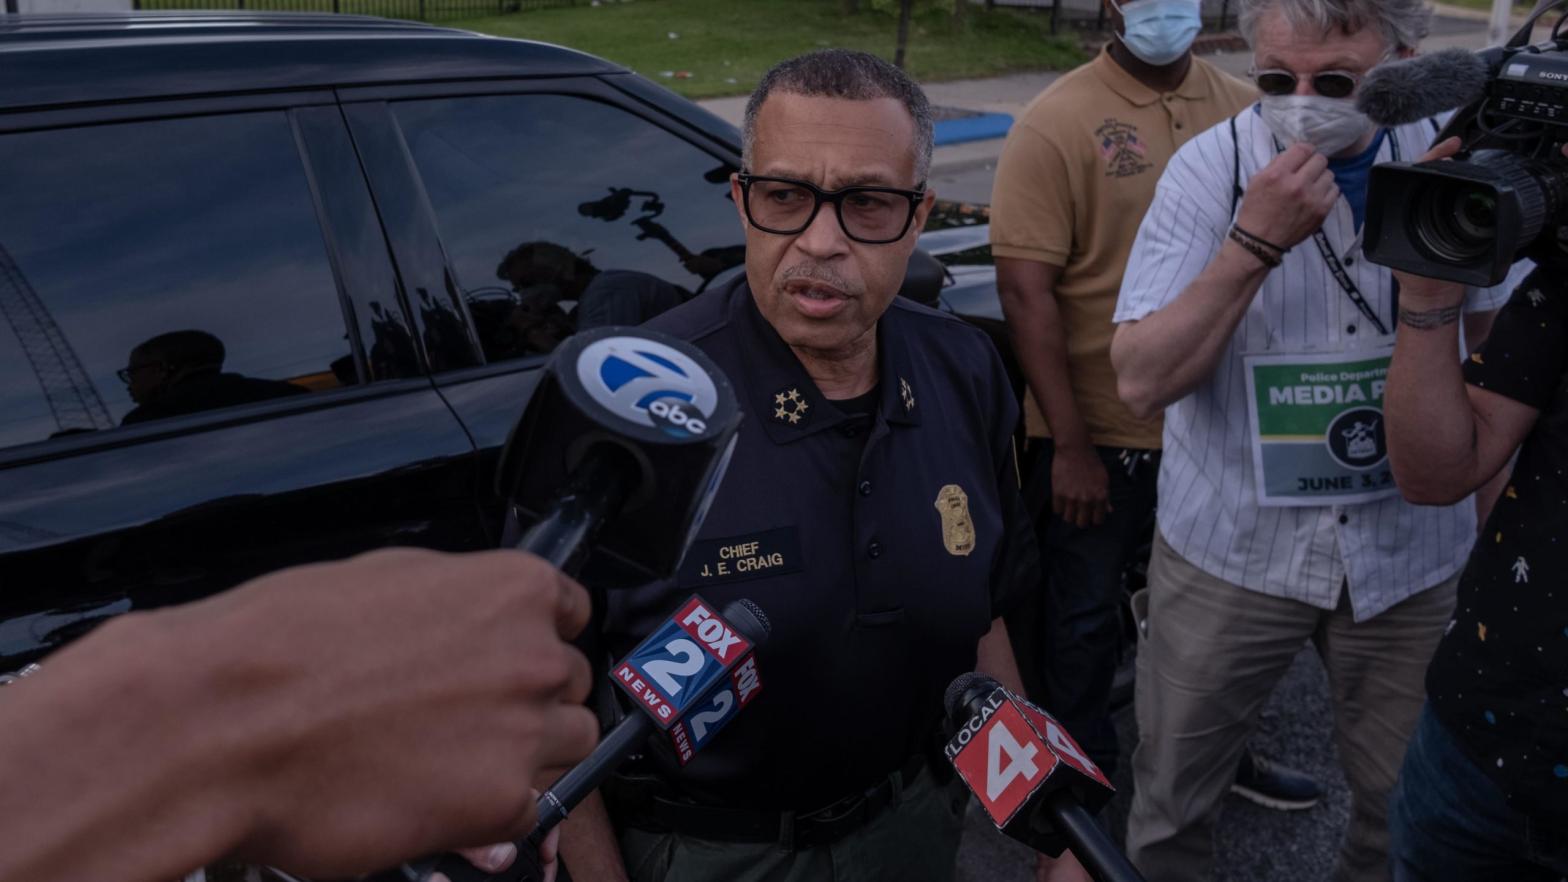 The Chief of Detroit Police James Craig speaks with the press about the protests taking place in Detroit, Michigan, June 3,2020  (Photo: Seth Herald, Getty Images)